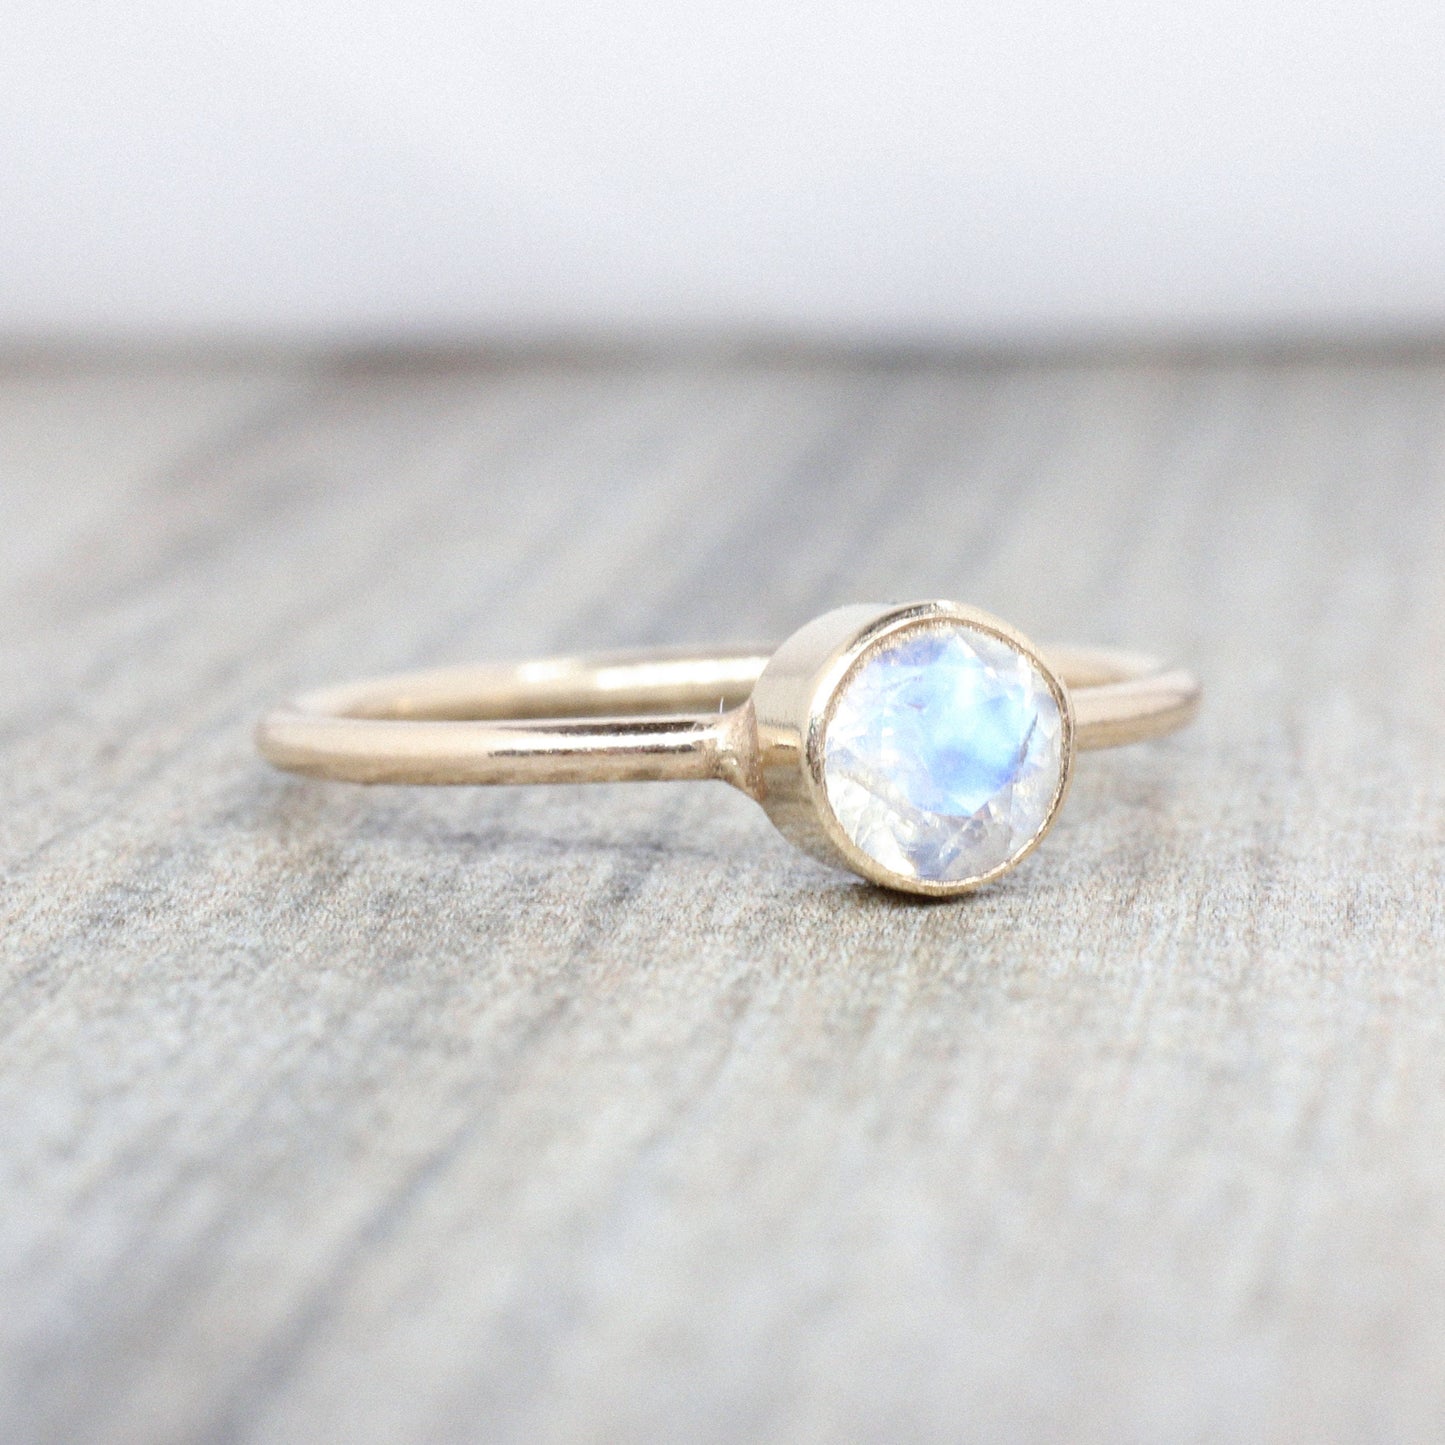 Rainbow Moonstone Stacking Ring in 14K Gold Filled // 5mm Faceted Gemstone June Birthstone